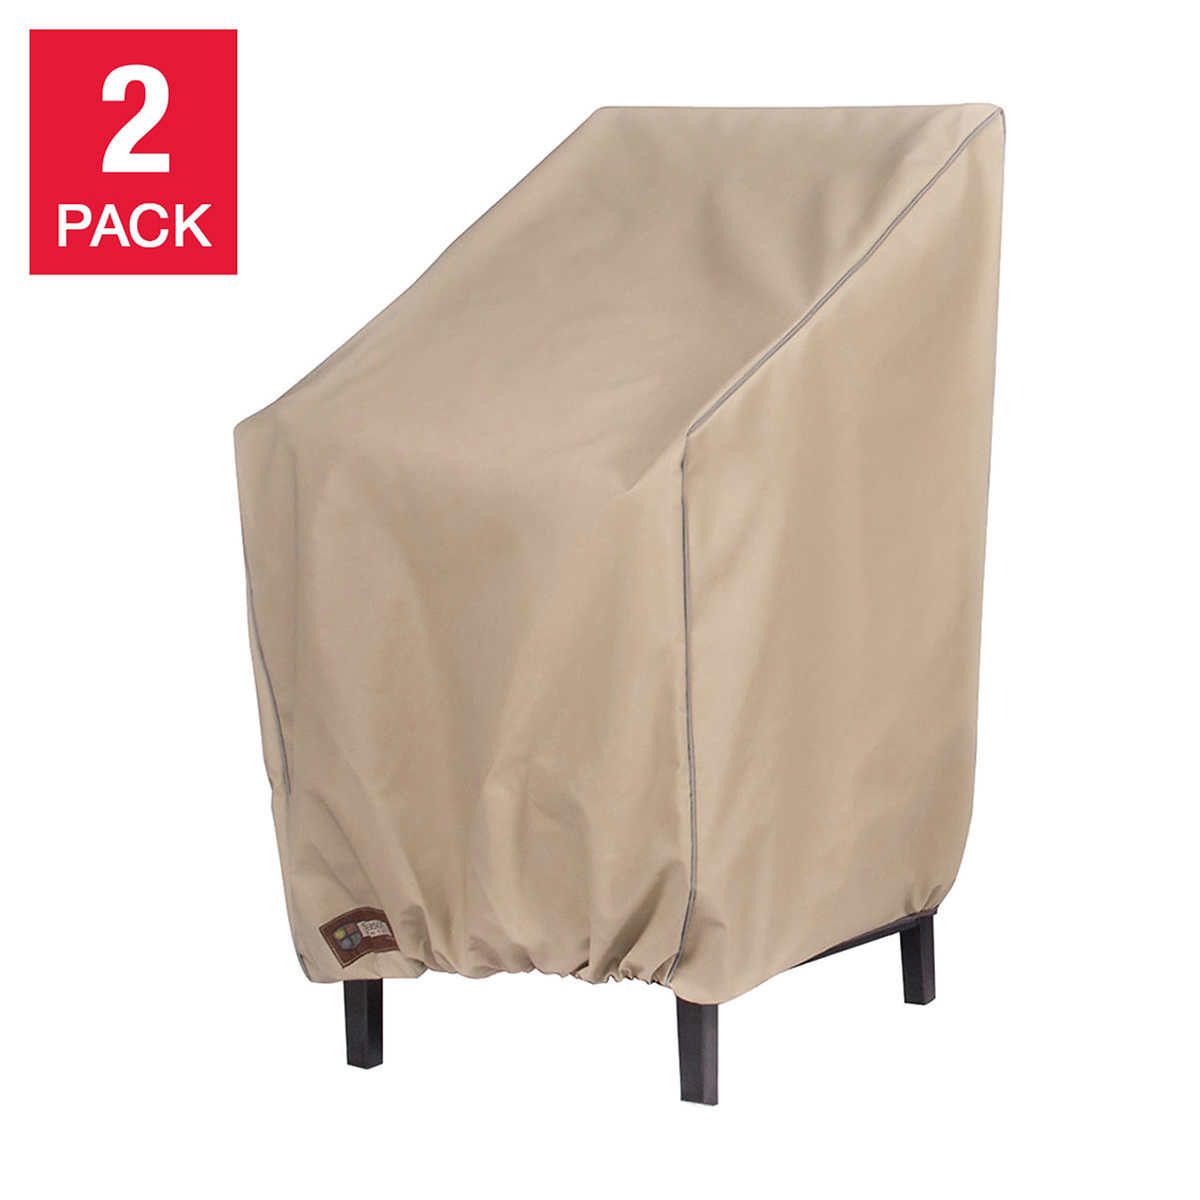 Outdoor Patio Chair Cover 2 Pack Bar, Bar Height Outdoor Chair Covers